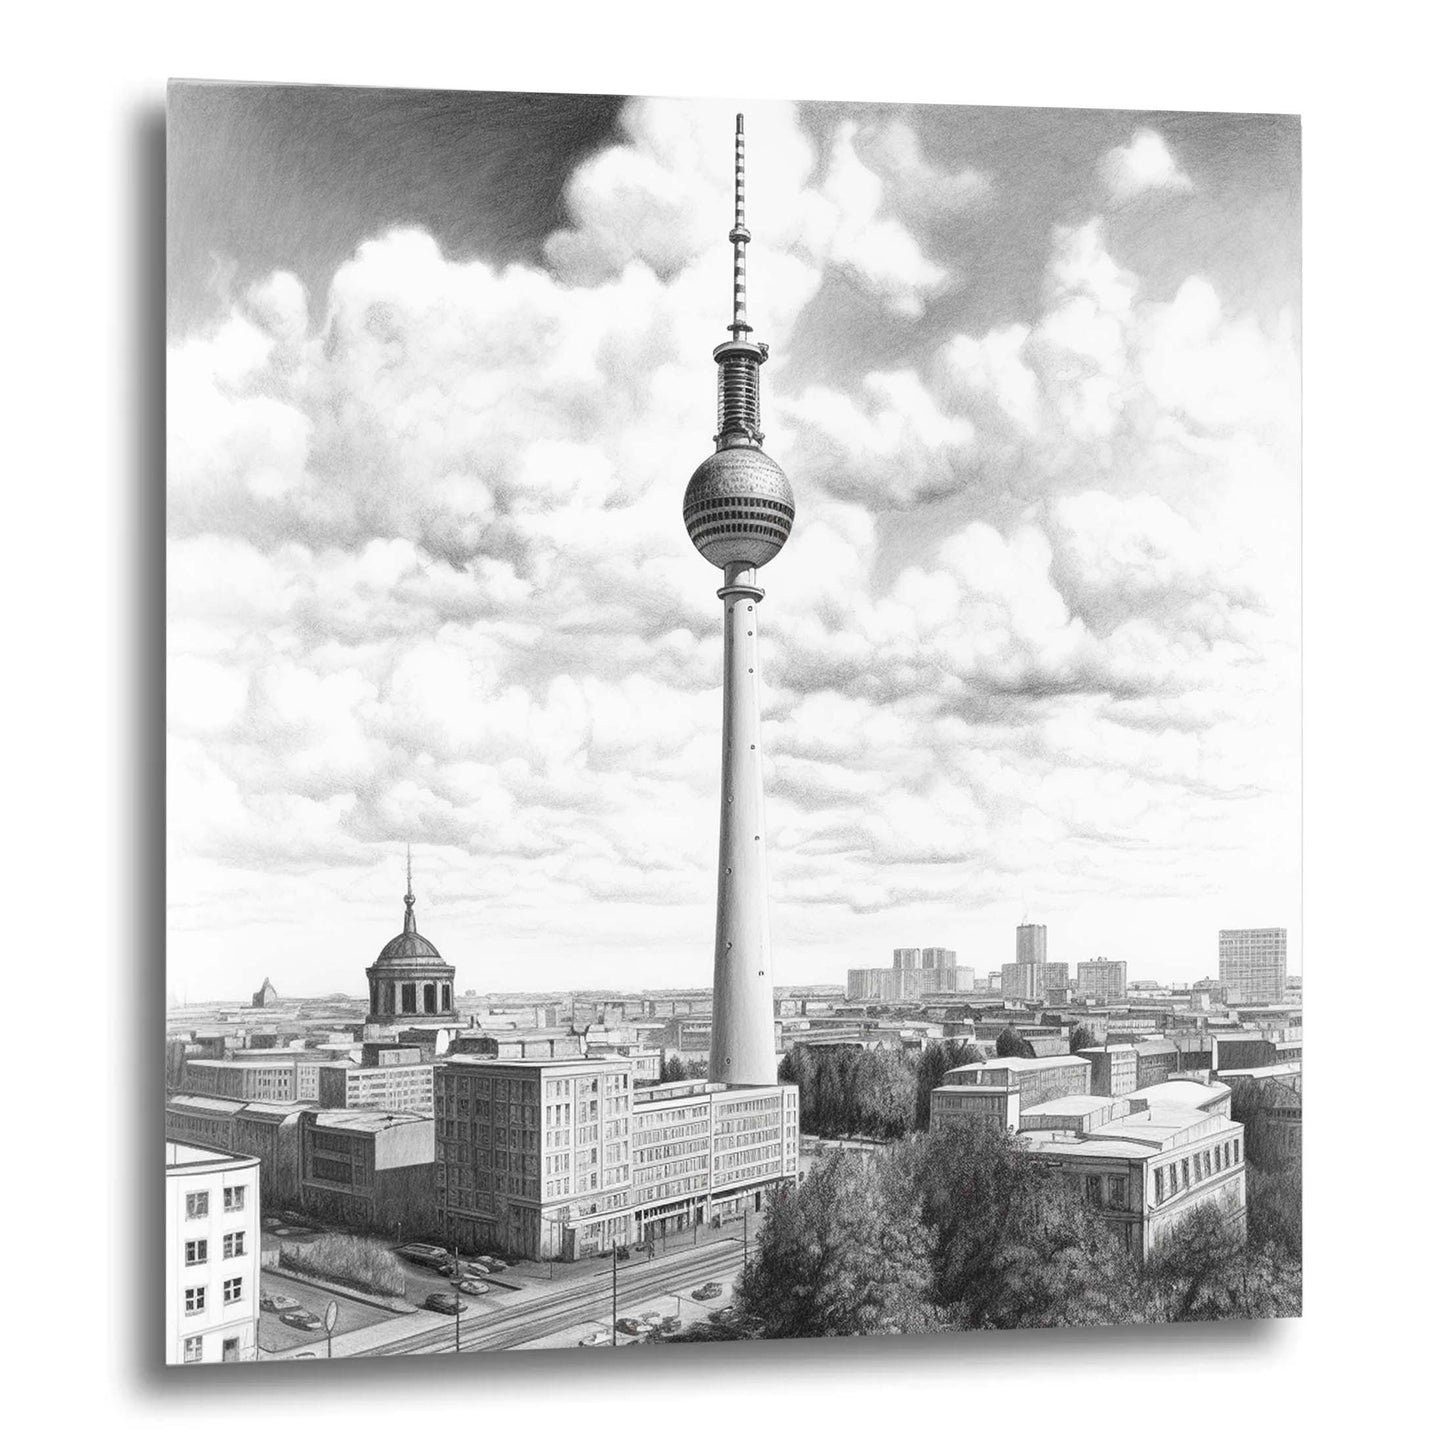 Berlin TV tower - mural in the style of a drawing